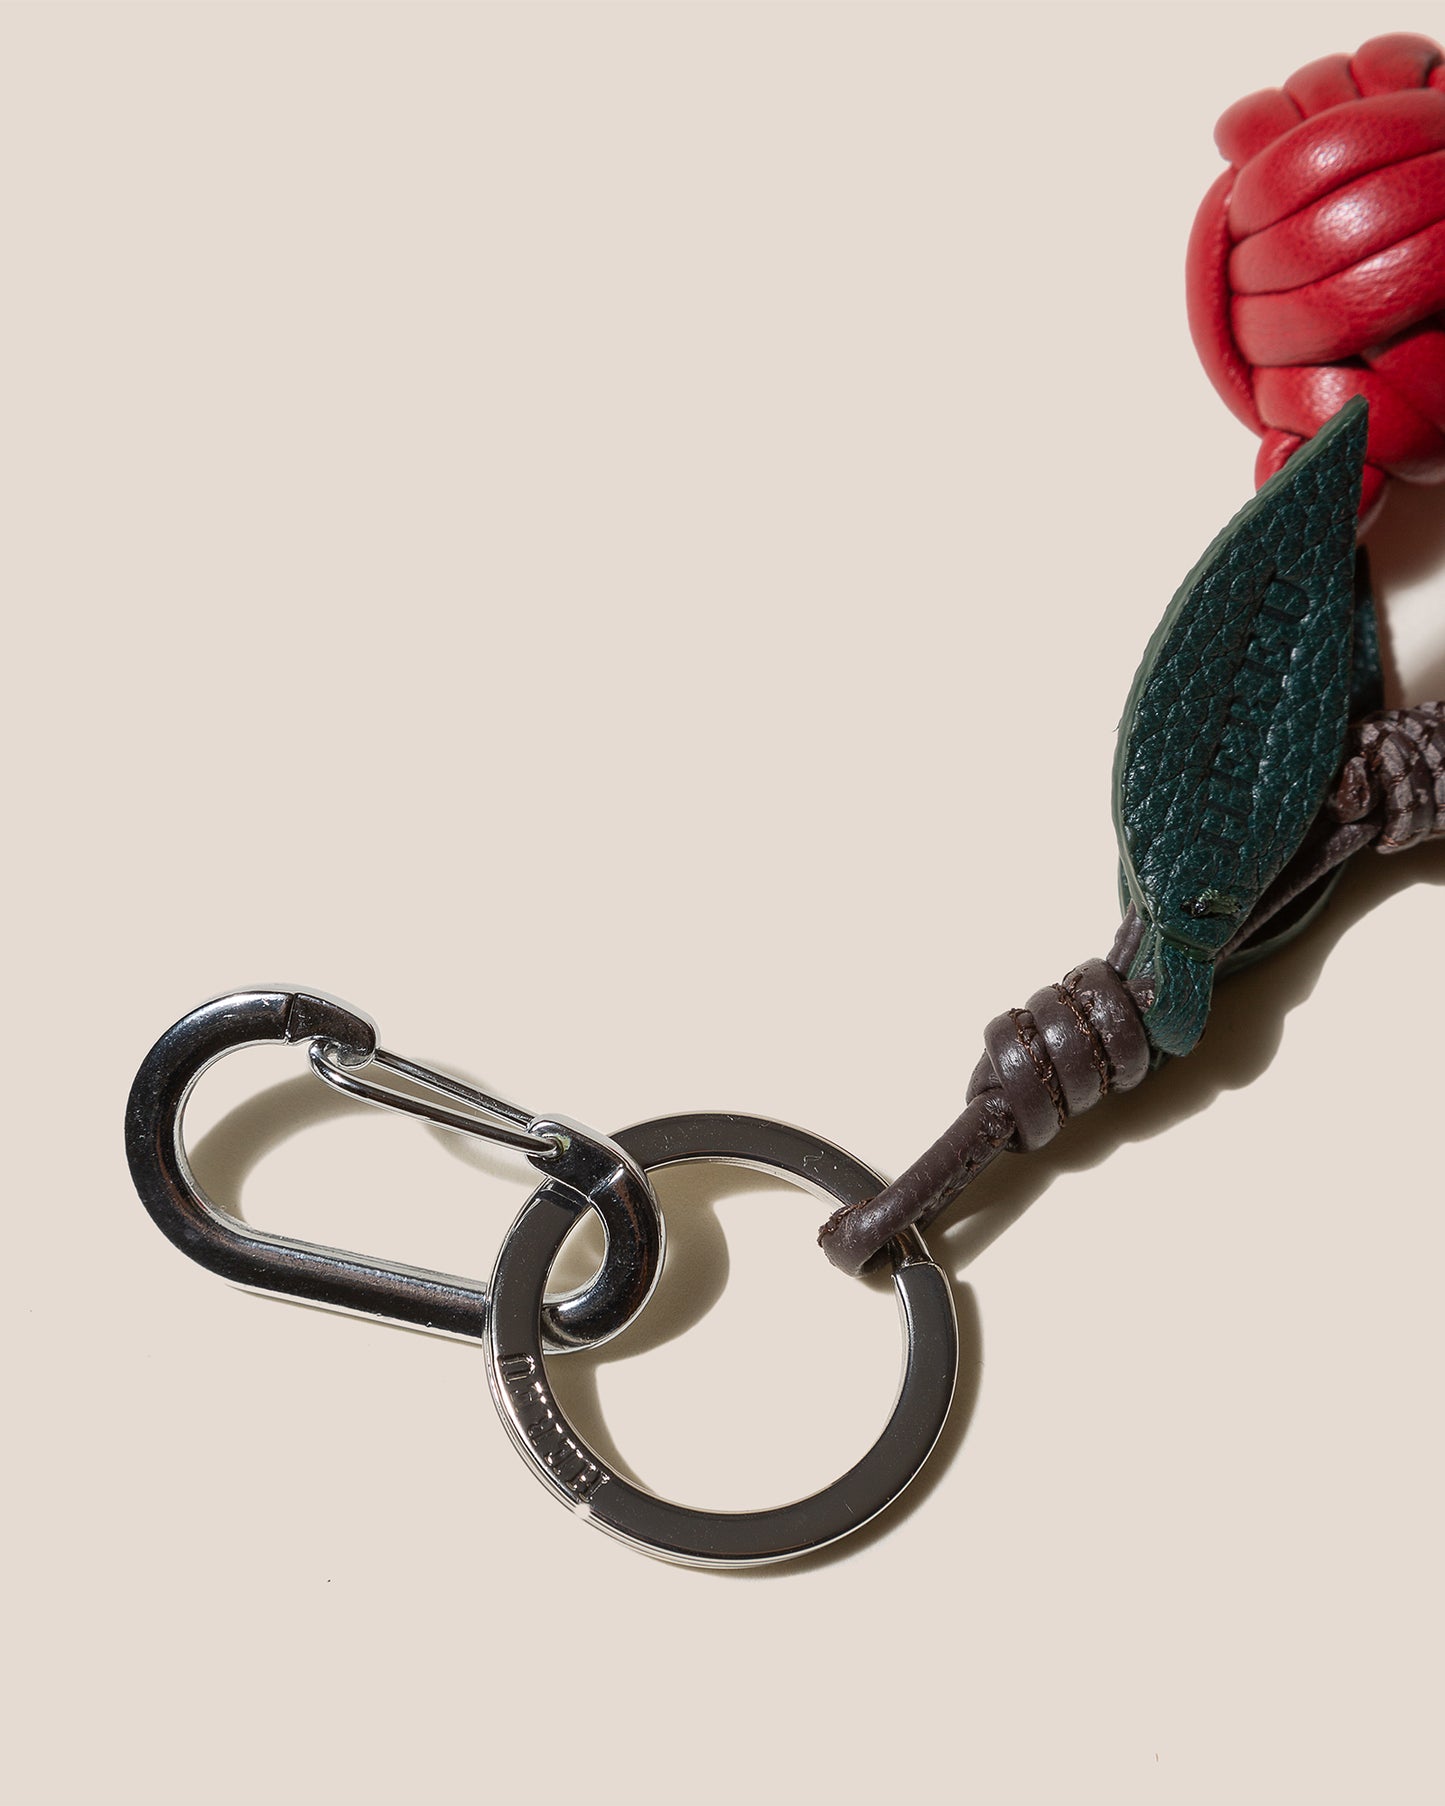 CIRERES - Hand-Knotted Cherries Leather Key Holder